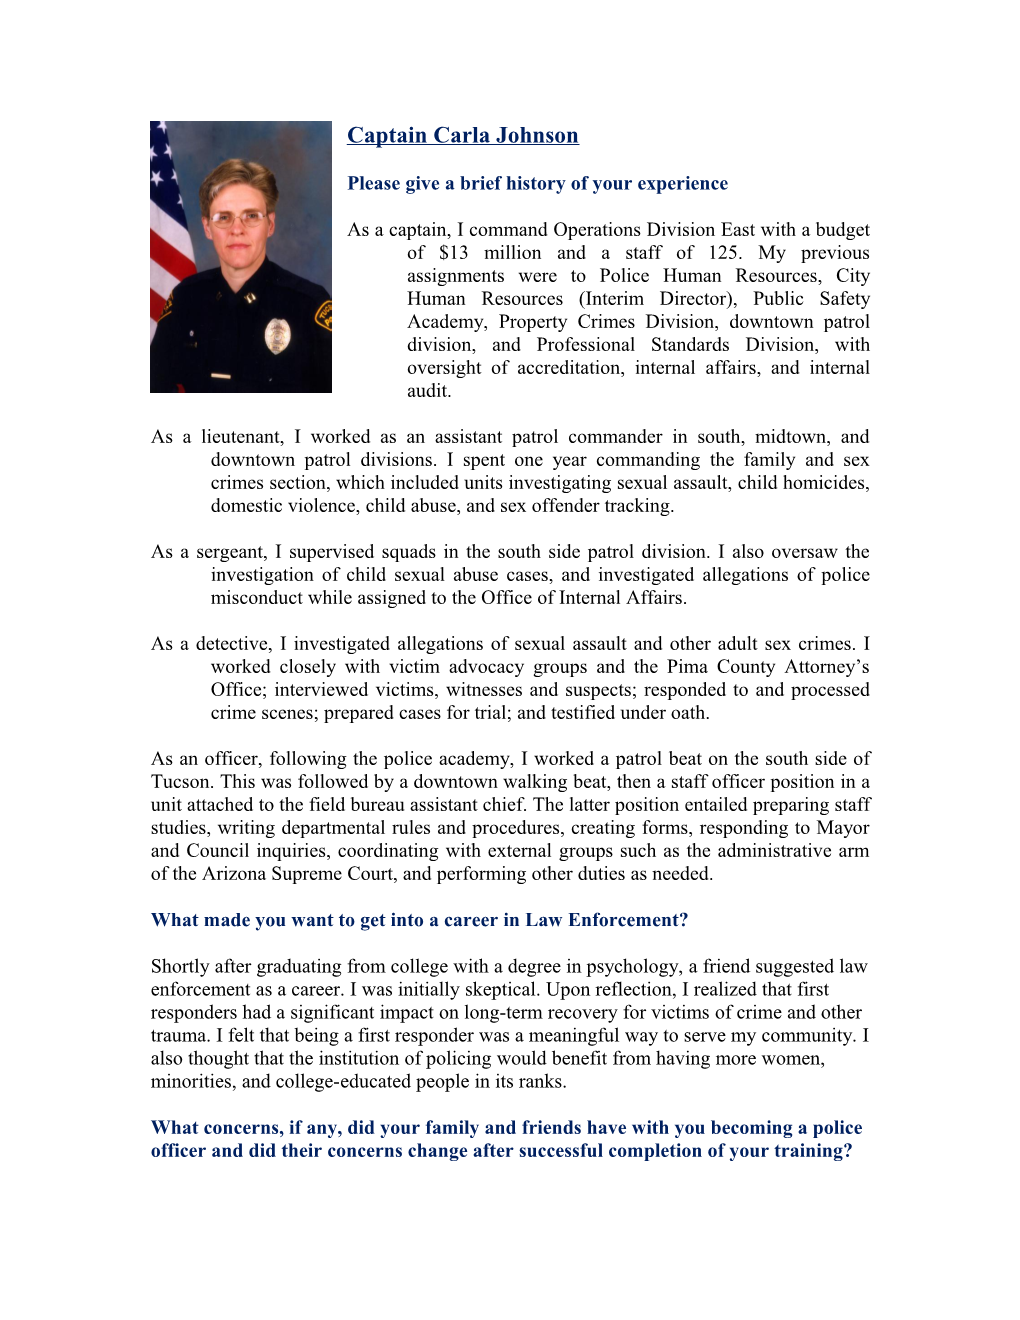 Women in Policing Questionnaire s2